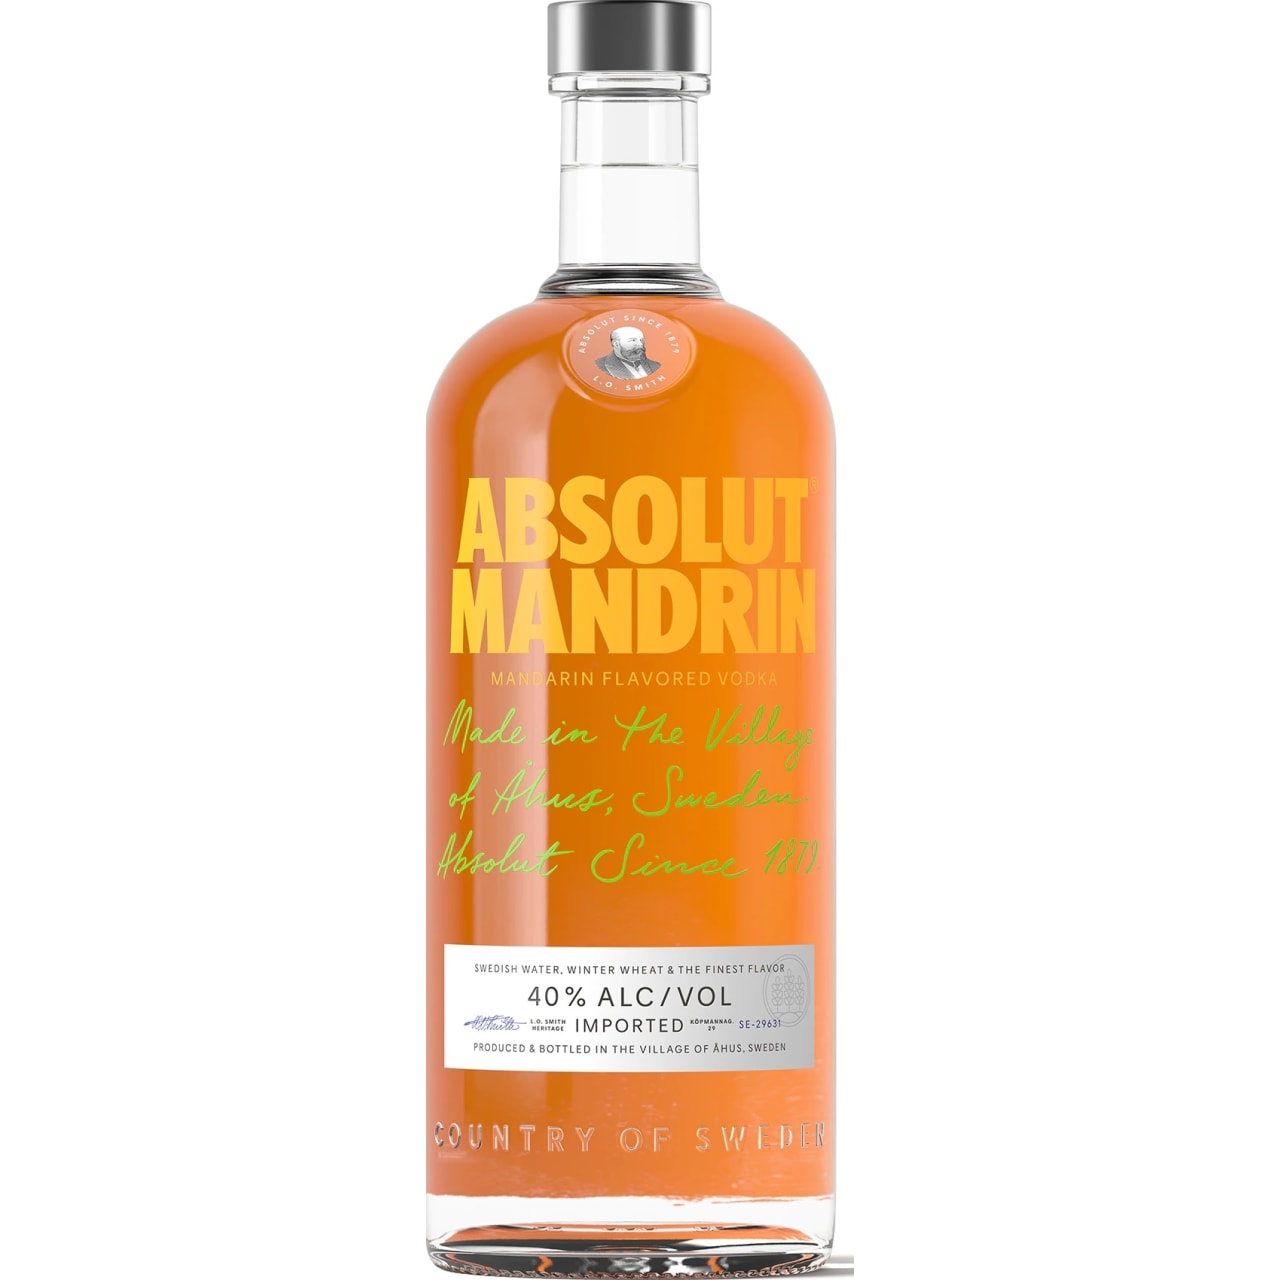 Absolut Mandrin is complex, smooth and mellow with a fruity mandarin and orange character mixed with a note of orange peel.